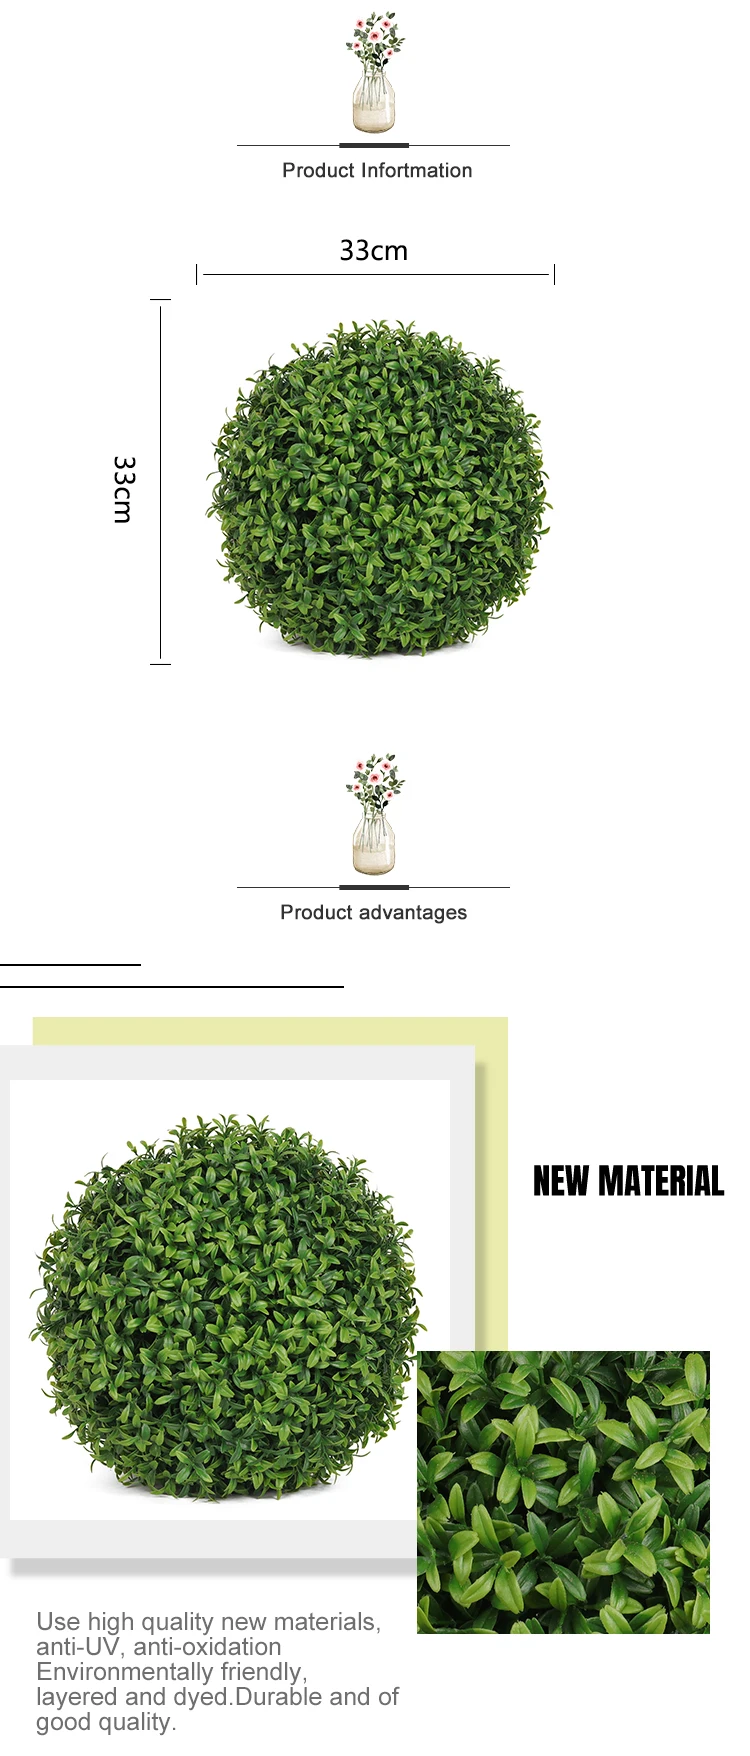 33cm Large Artificial Topiary Grass Hanging Ball